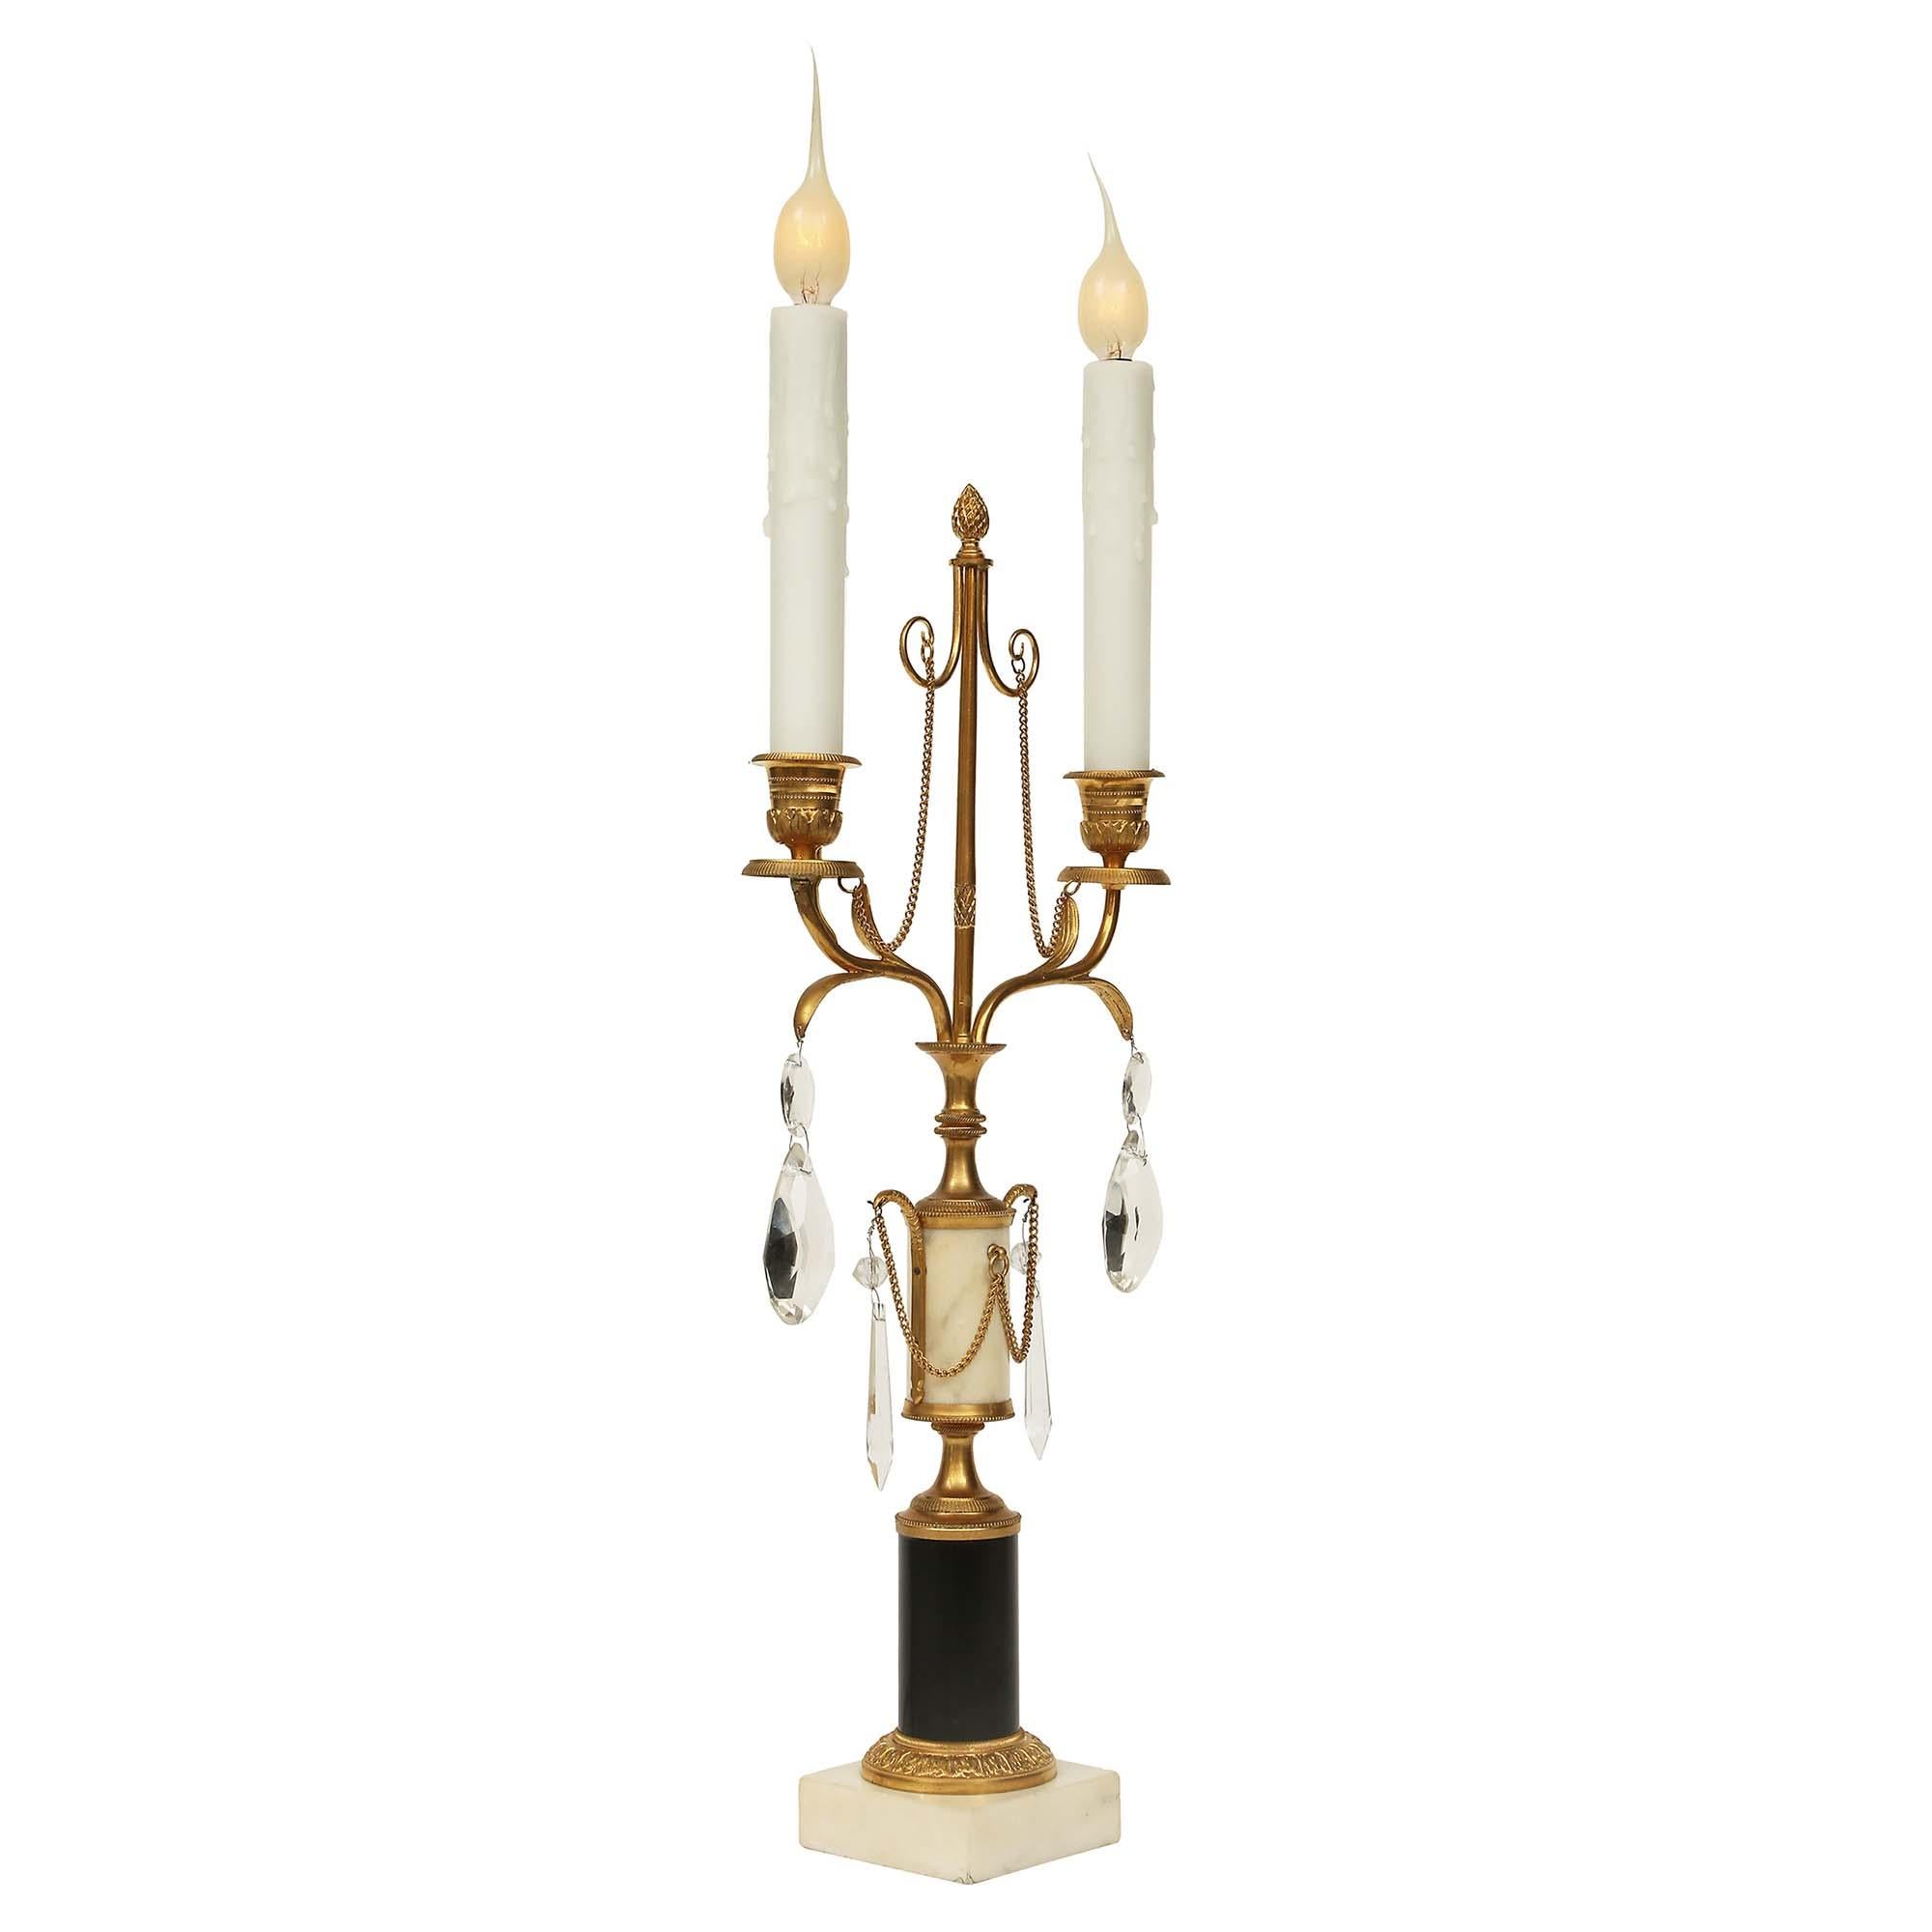 An elegant pair of French early 19th century Louis XVI style with white carrara and black Belgian marble and ormolu two light candelabras. The pair are raised by a square white Carrera marble base below a black Belgian marble plinth, decorated with